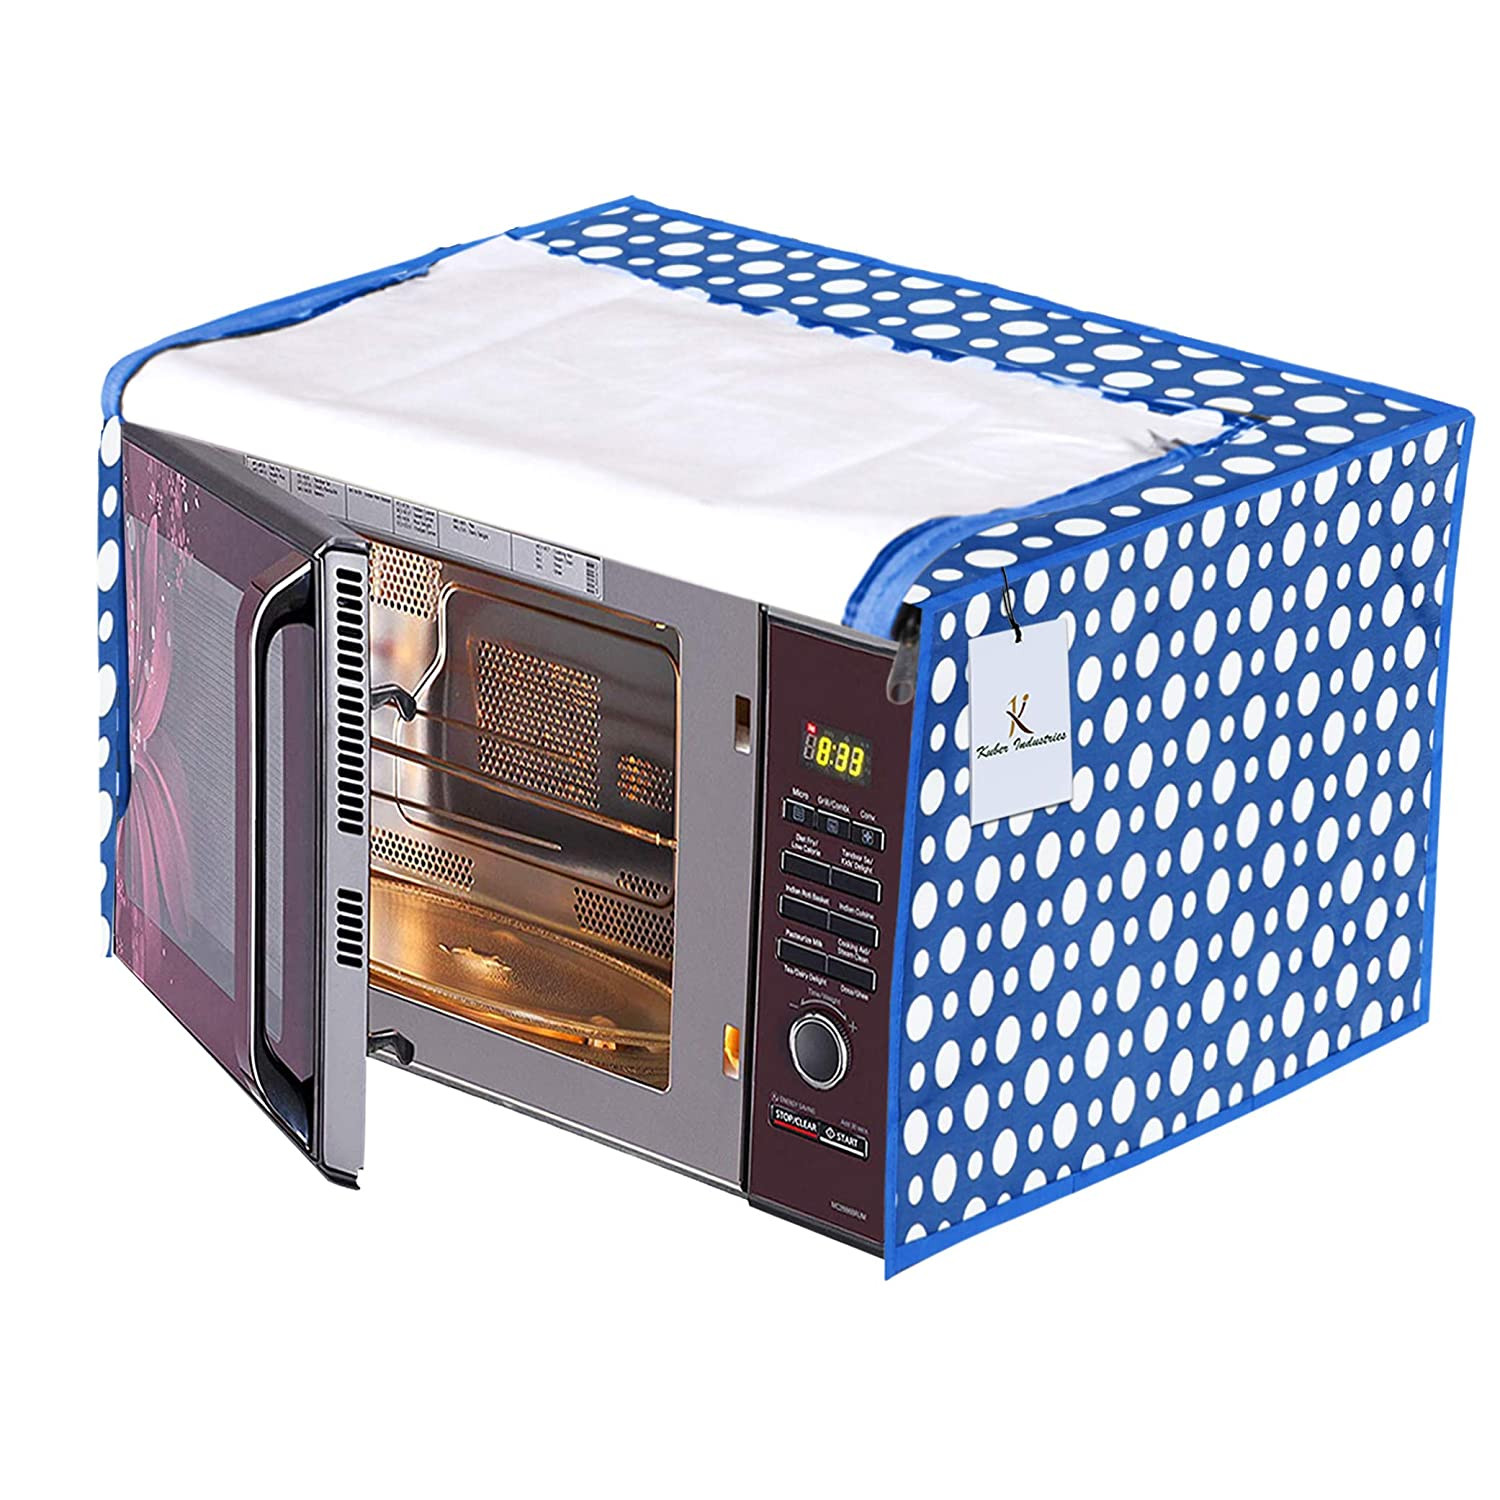 Kuber Industries PVC Dot Printed Microwave Oven Cover,25 Ltr. (Blue)-HS43KUBMART26021